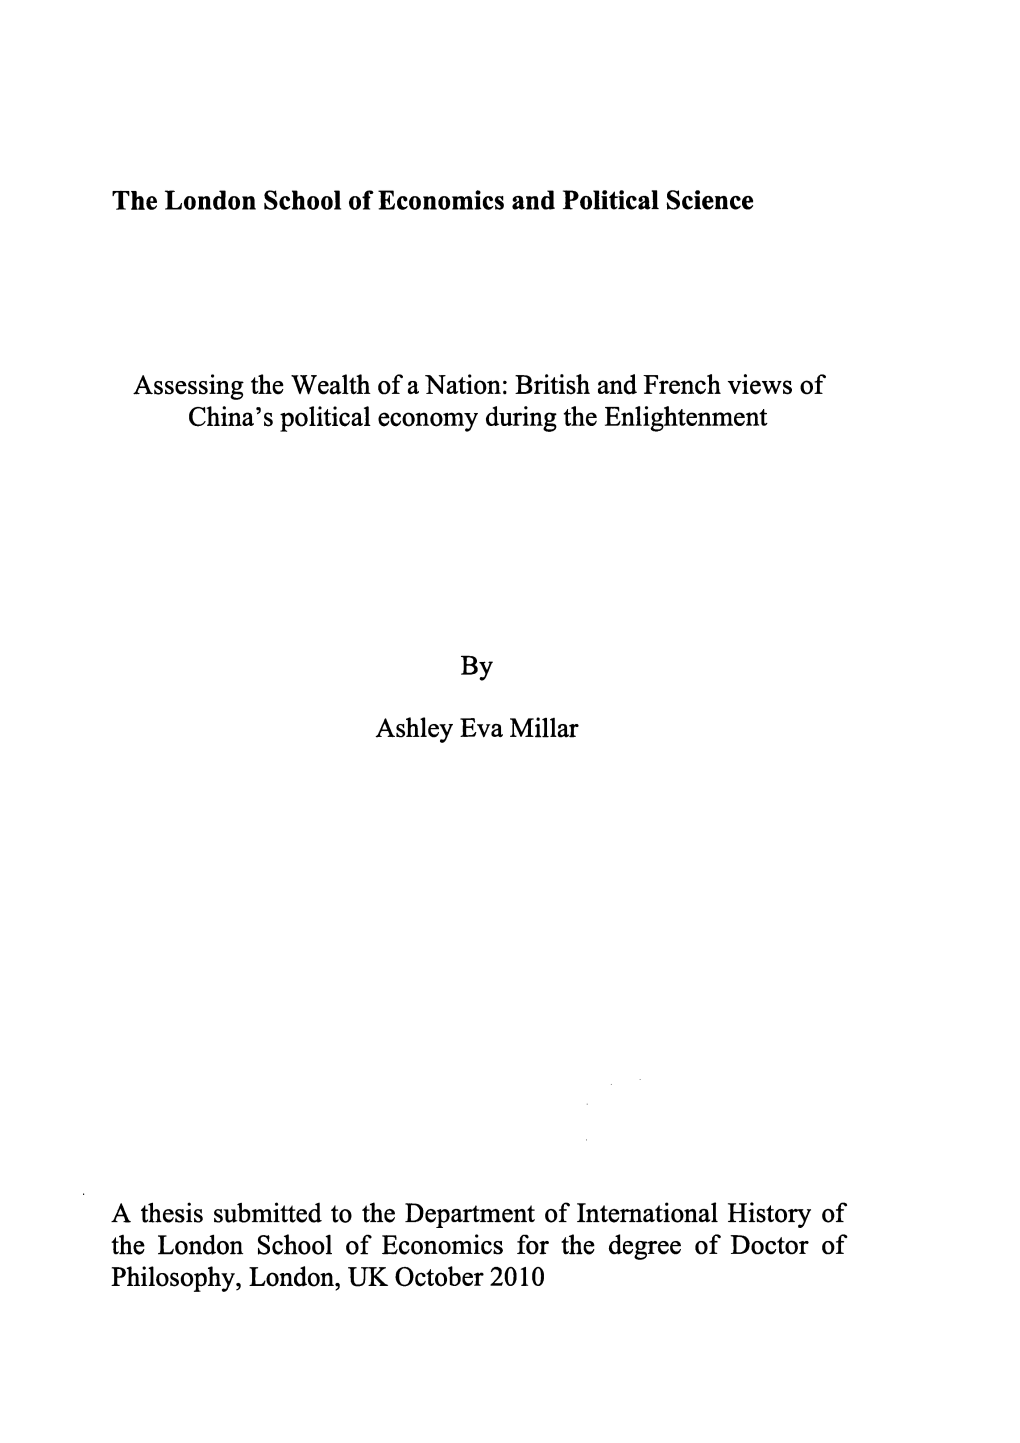 The London School of Economics and Political Science Assessing the Wealth of a Nation: British and French Views of China's